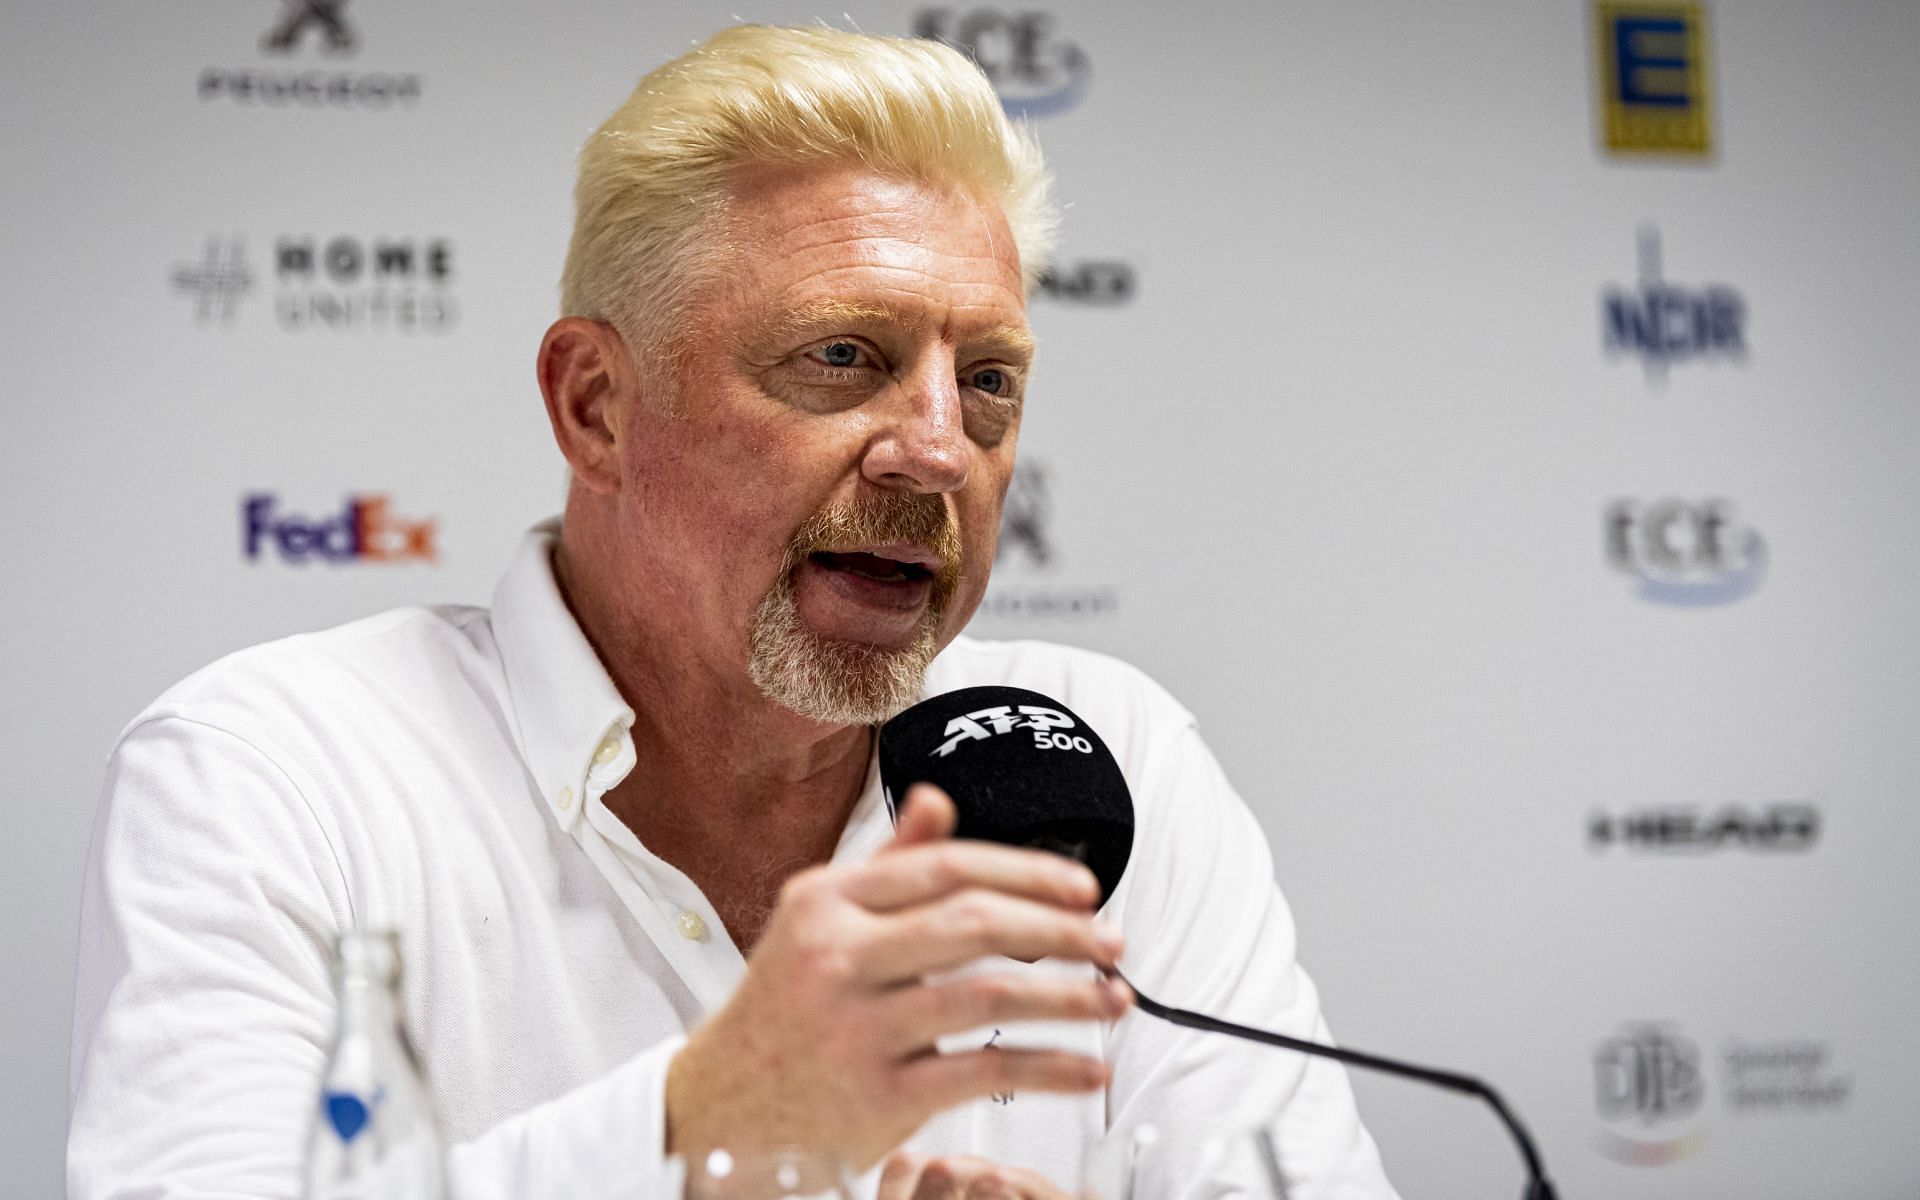 Boris Becker pictured at a press conference during the Hamburg Open 2019.